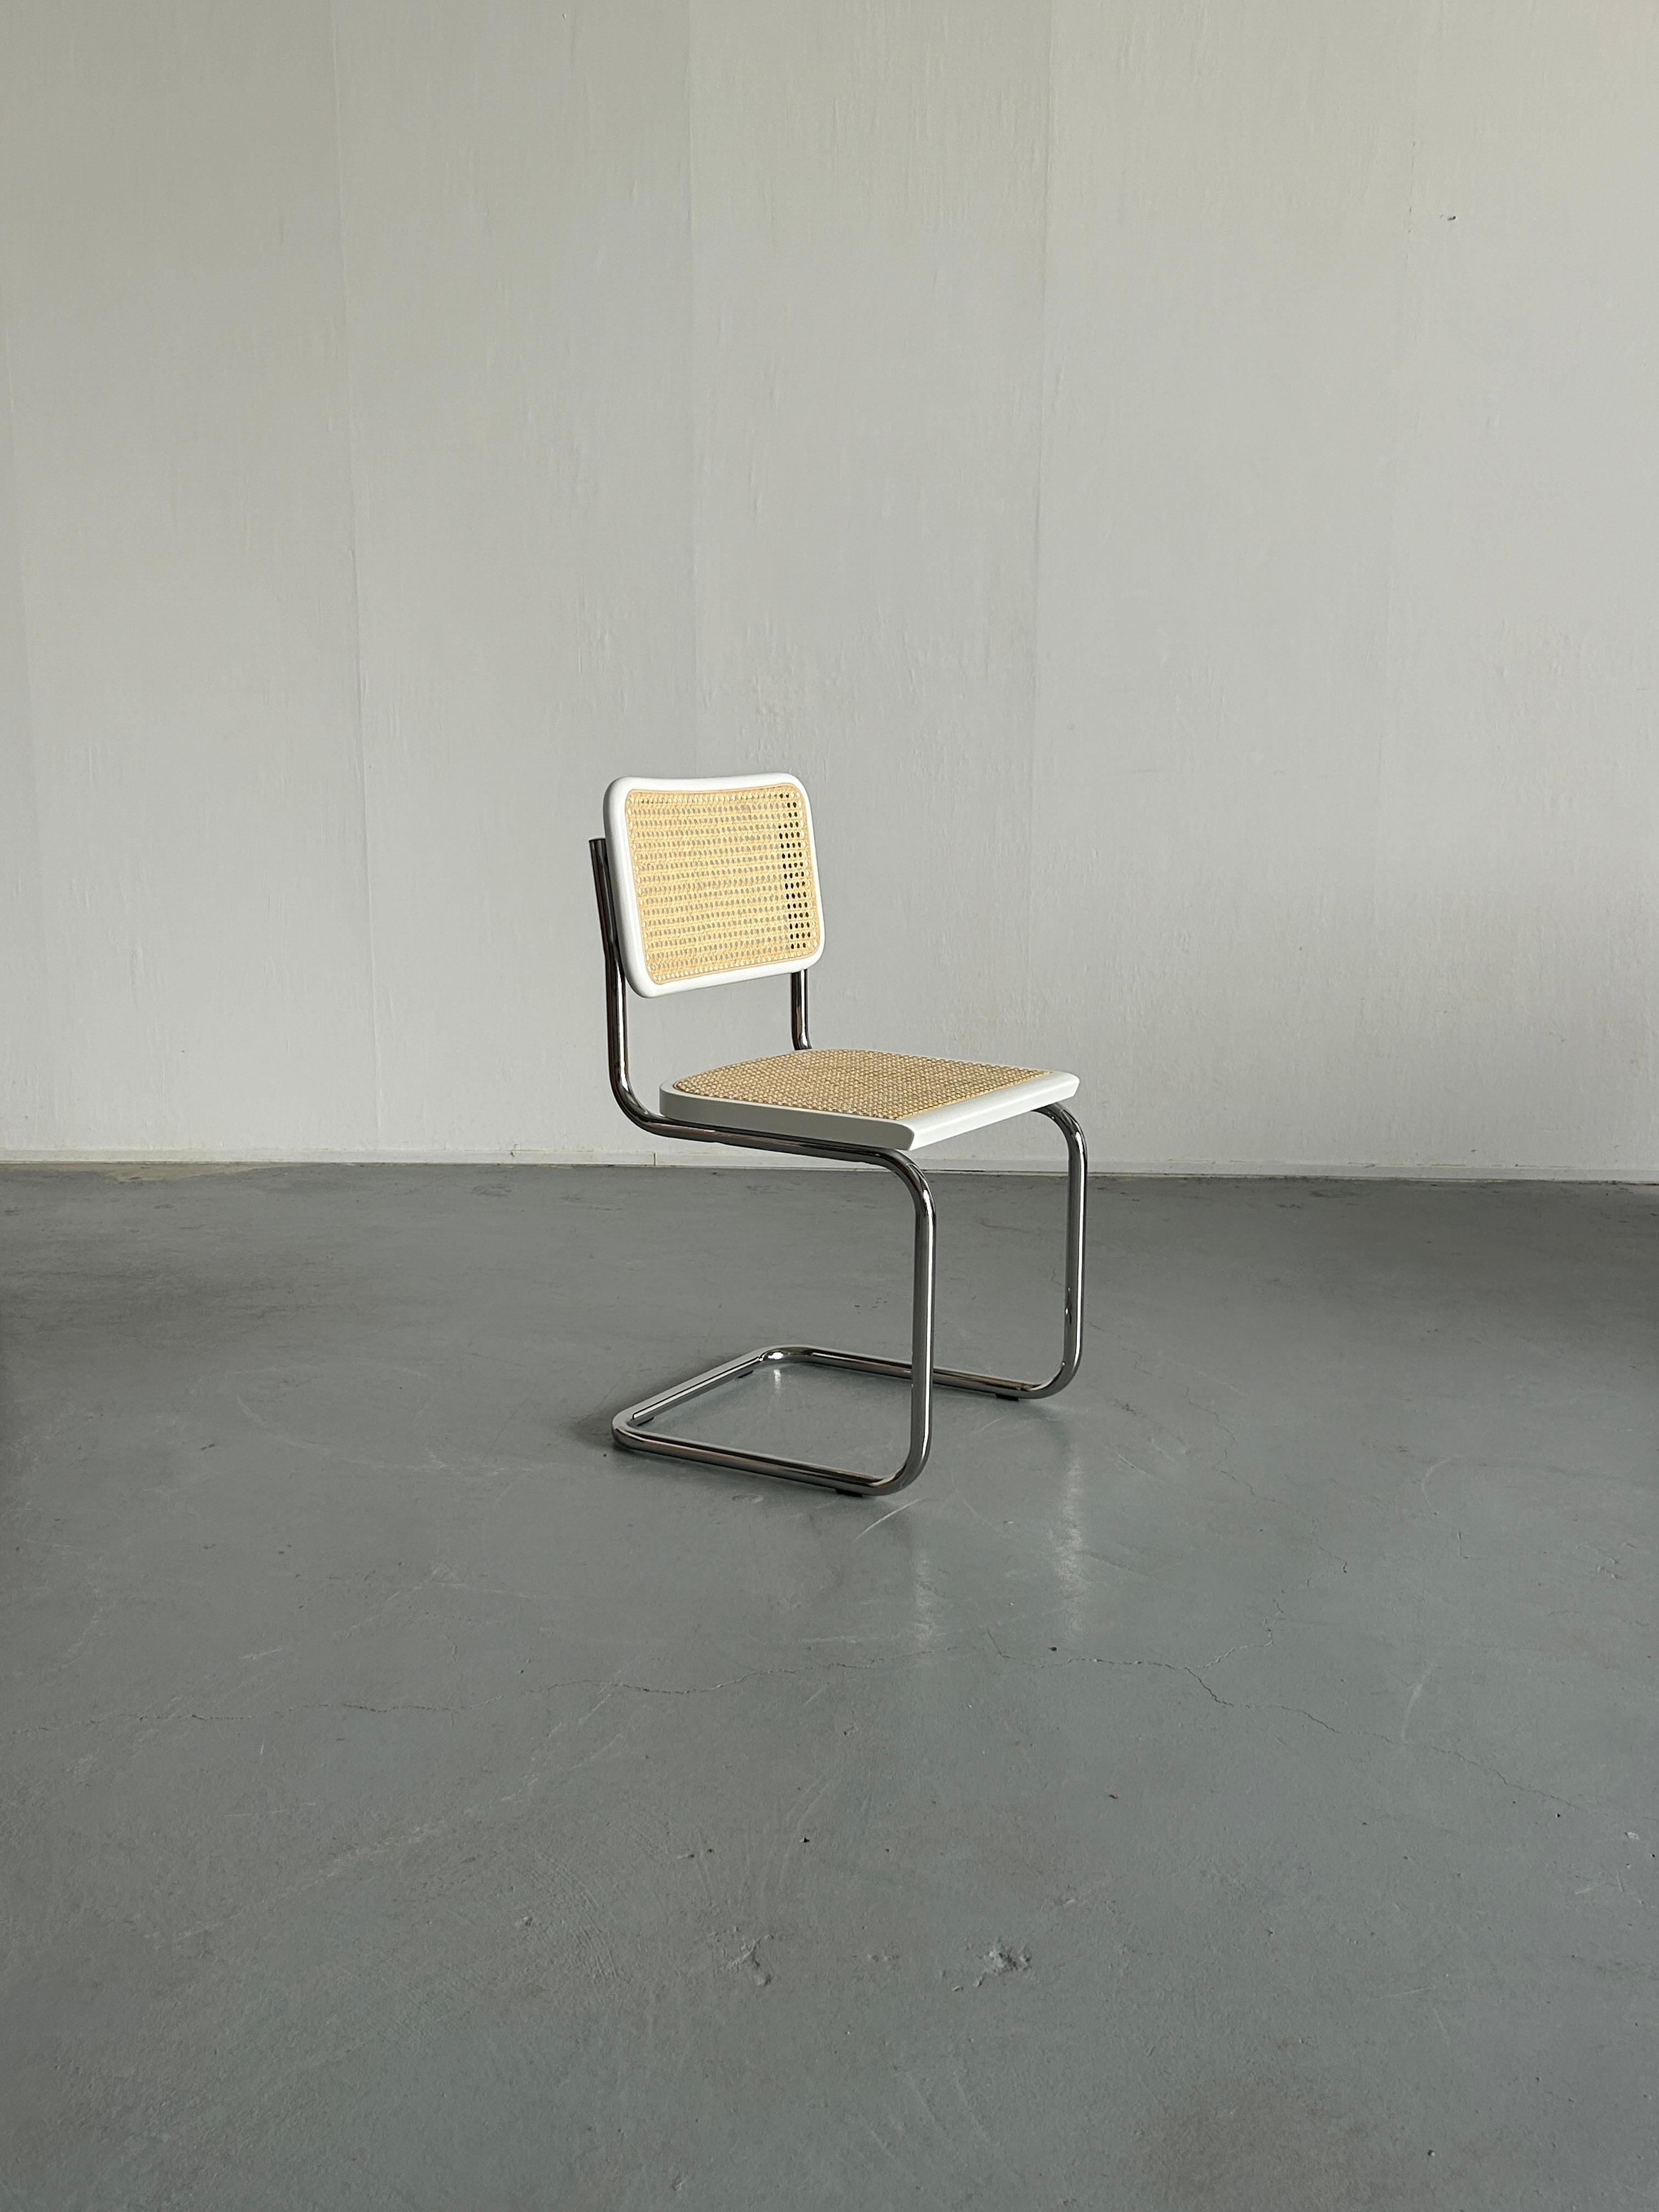 The Bauhaus classic tubular chrome steel cantilever chairs, model B32 or popularly known as Cesca, designed by Marcel Breuer.

Unknown Italian production, circa 2000-2003. Not a Knoll original production.
Originally a part of a local city hall